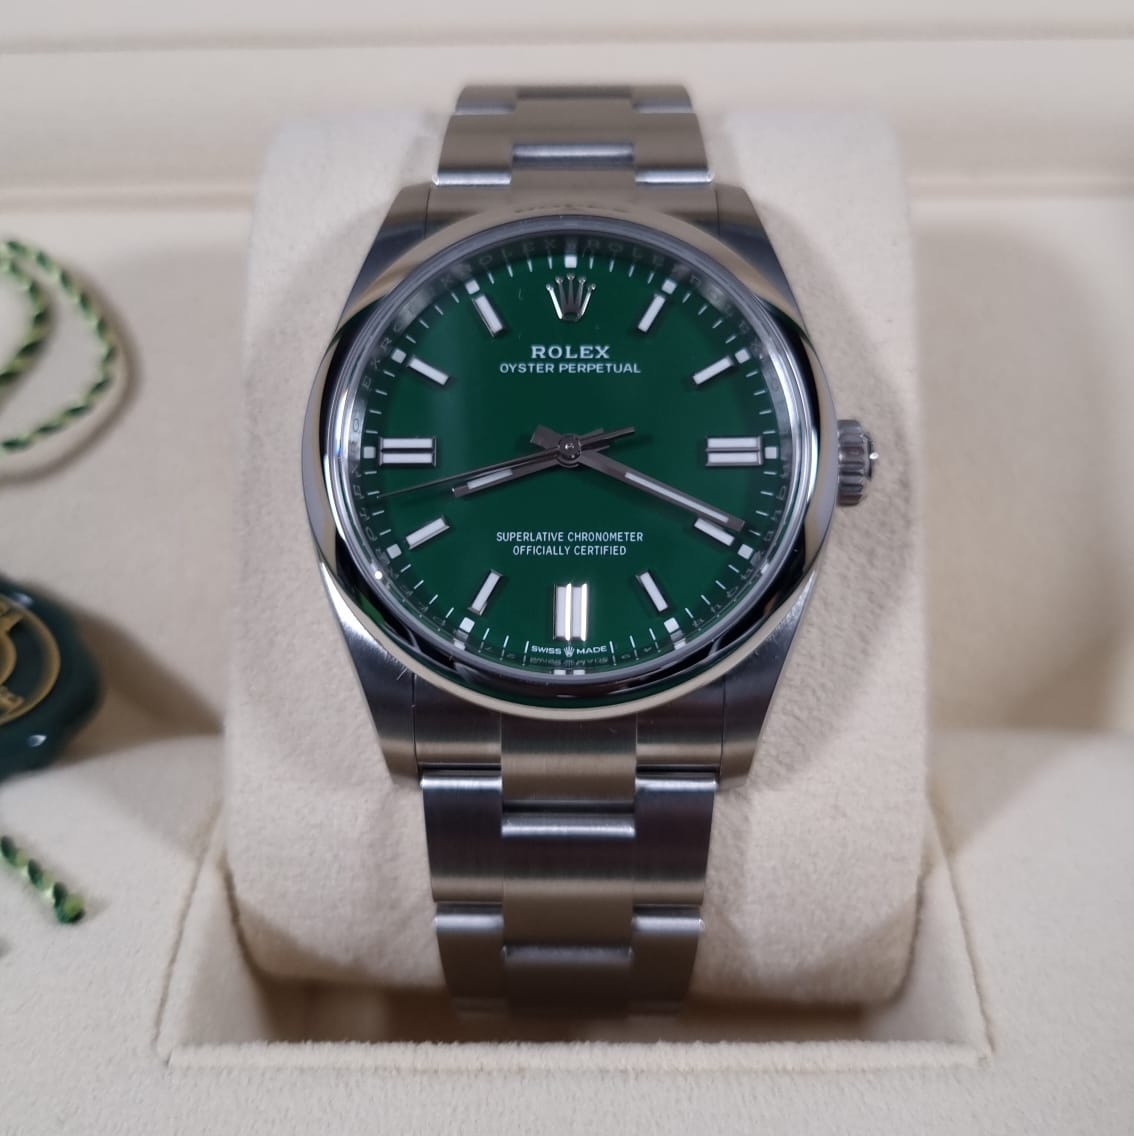 ROLEX “OYSTER PERPETUAL” 12600